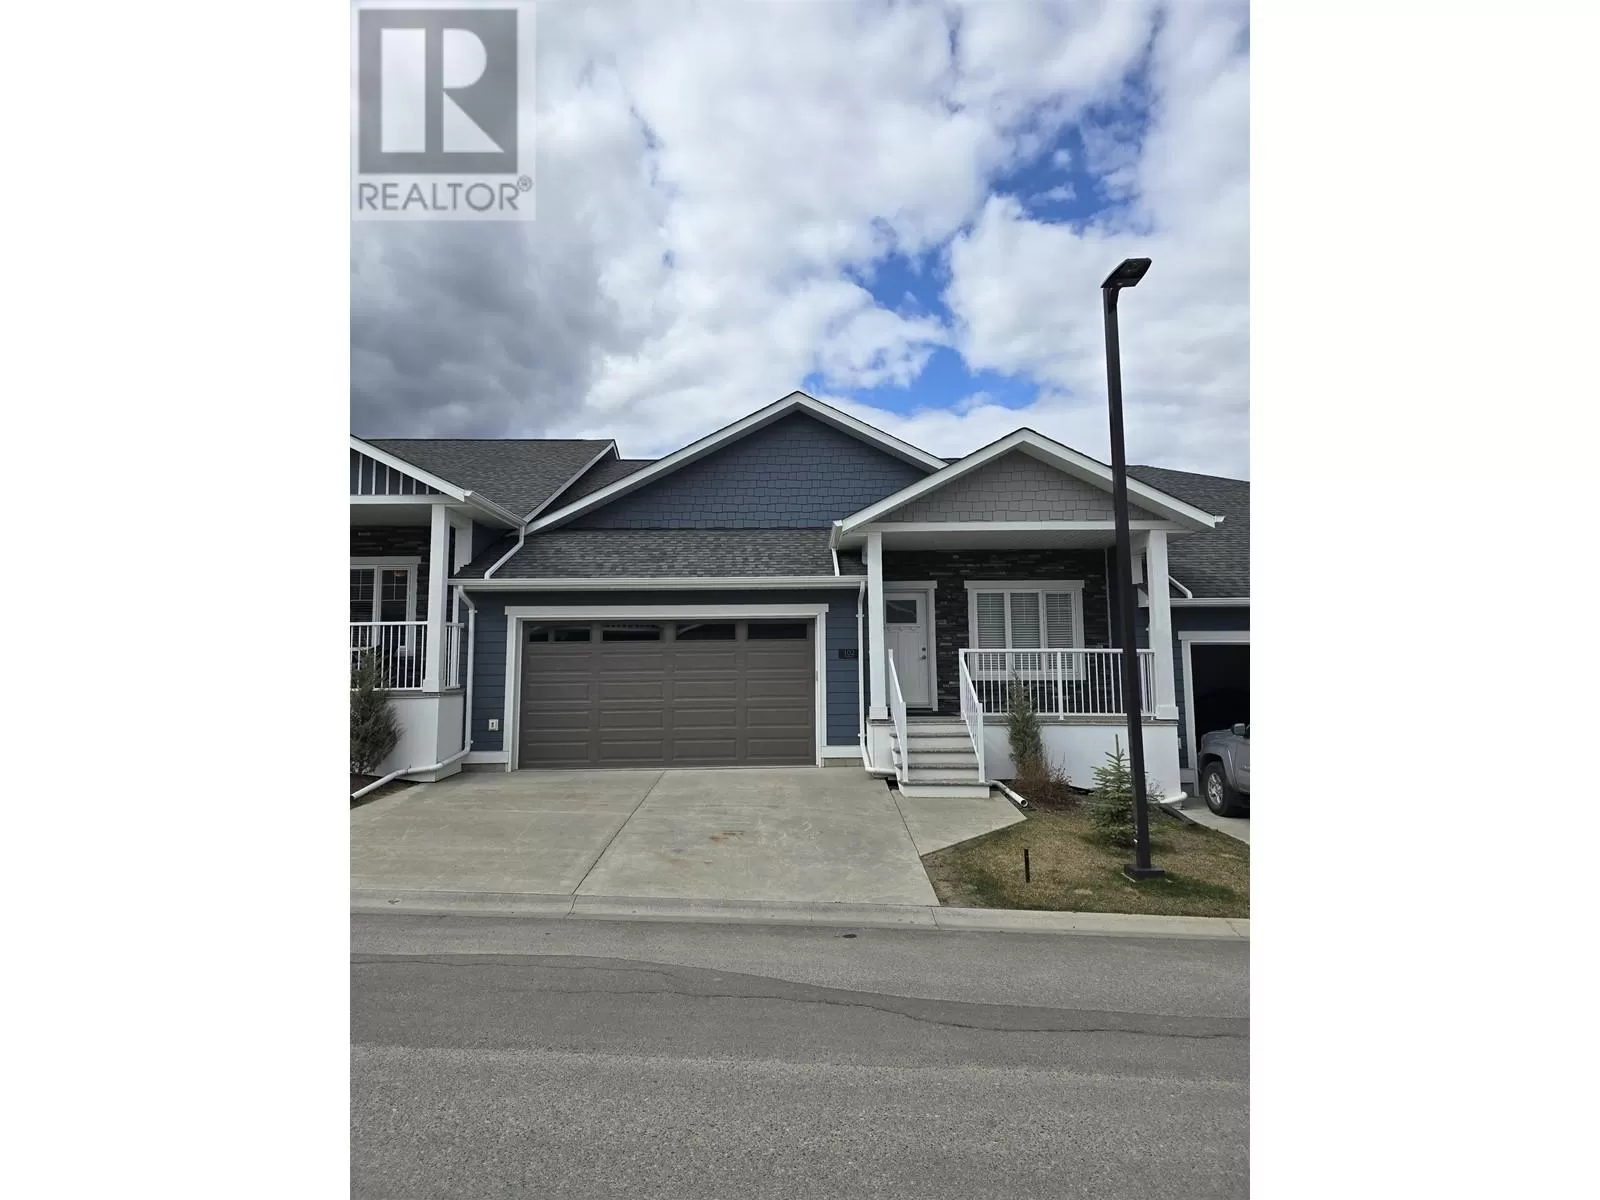 Row / Townhouse for rent: 102 2425 Rowe Street, Prince George, British Columbia V2N 0J3